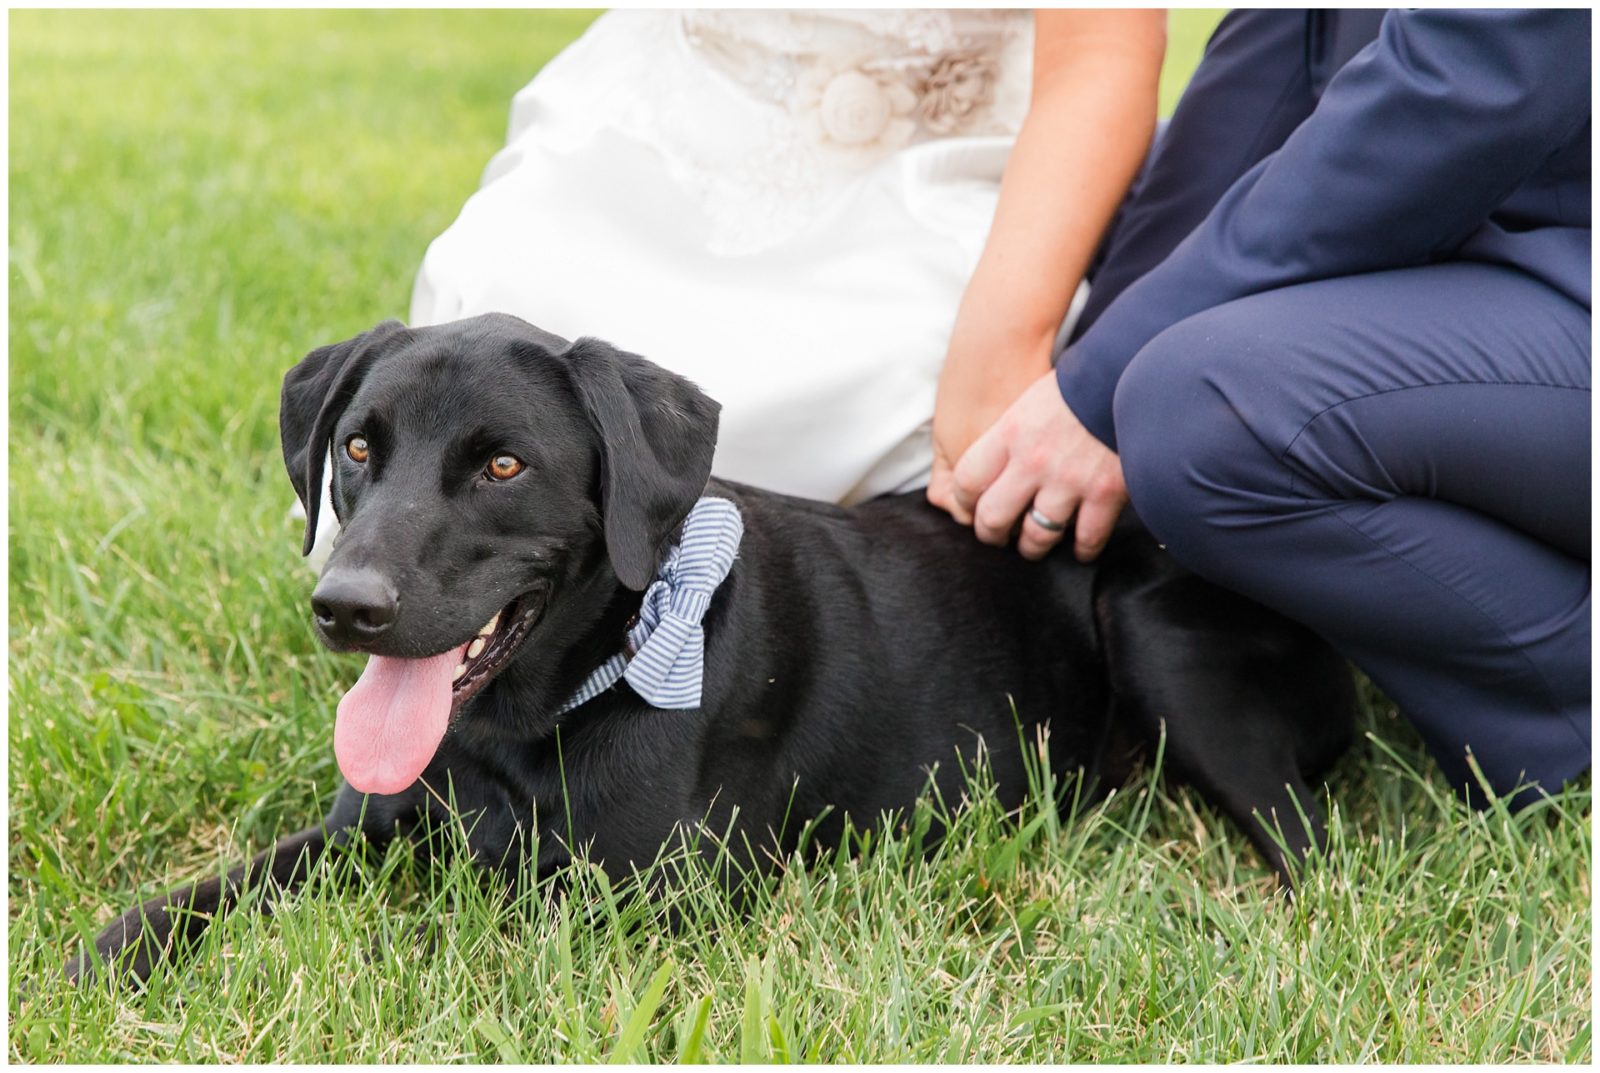 Bride and Groom Wedding Photos with a dog at the Barn at McCall Springs in Lawrenceburg, Kentucky.